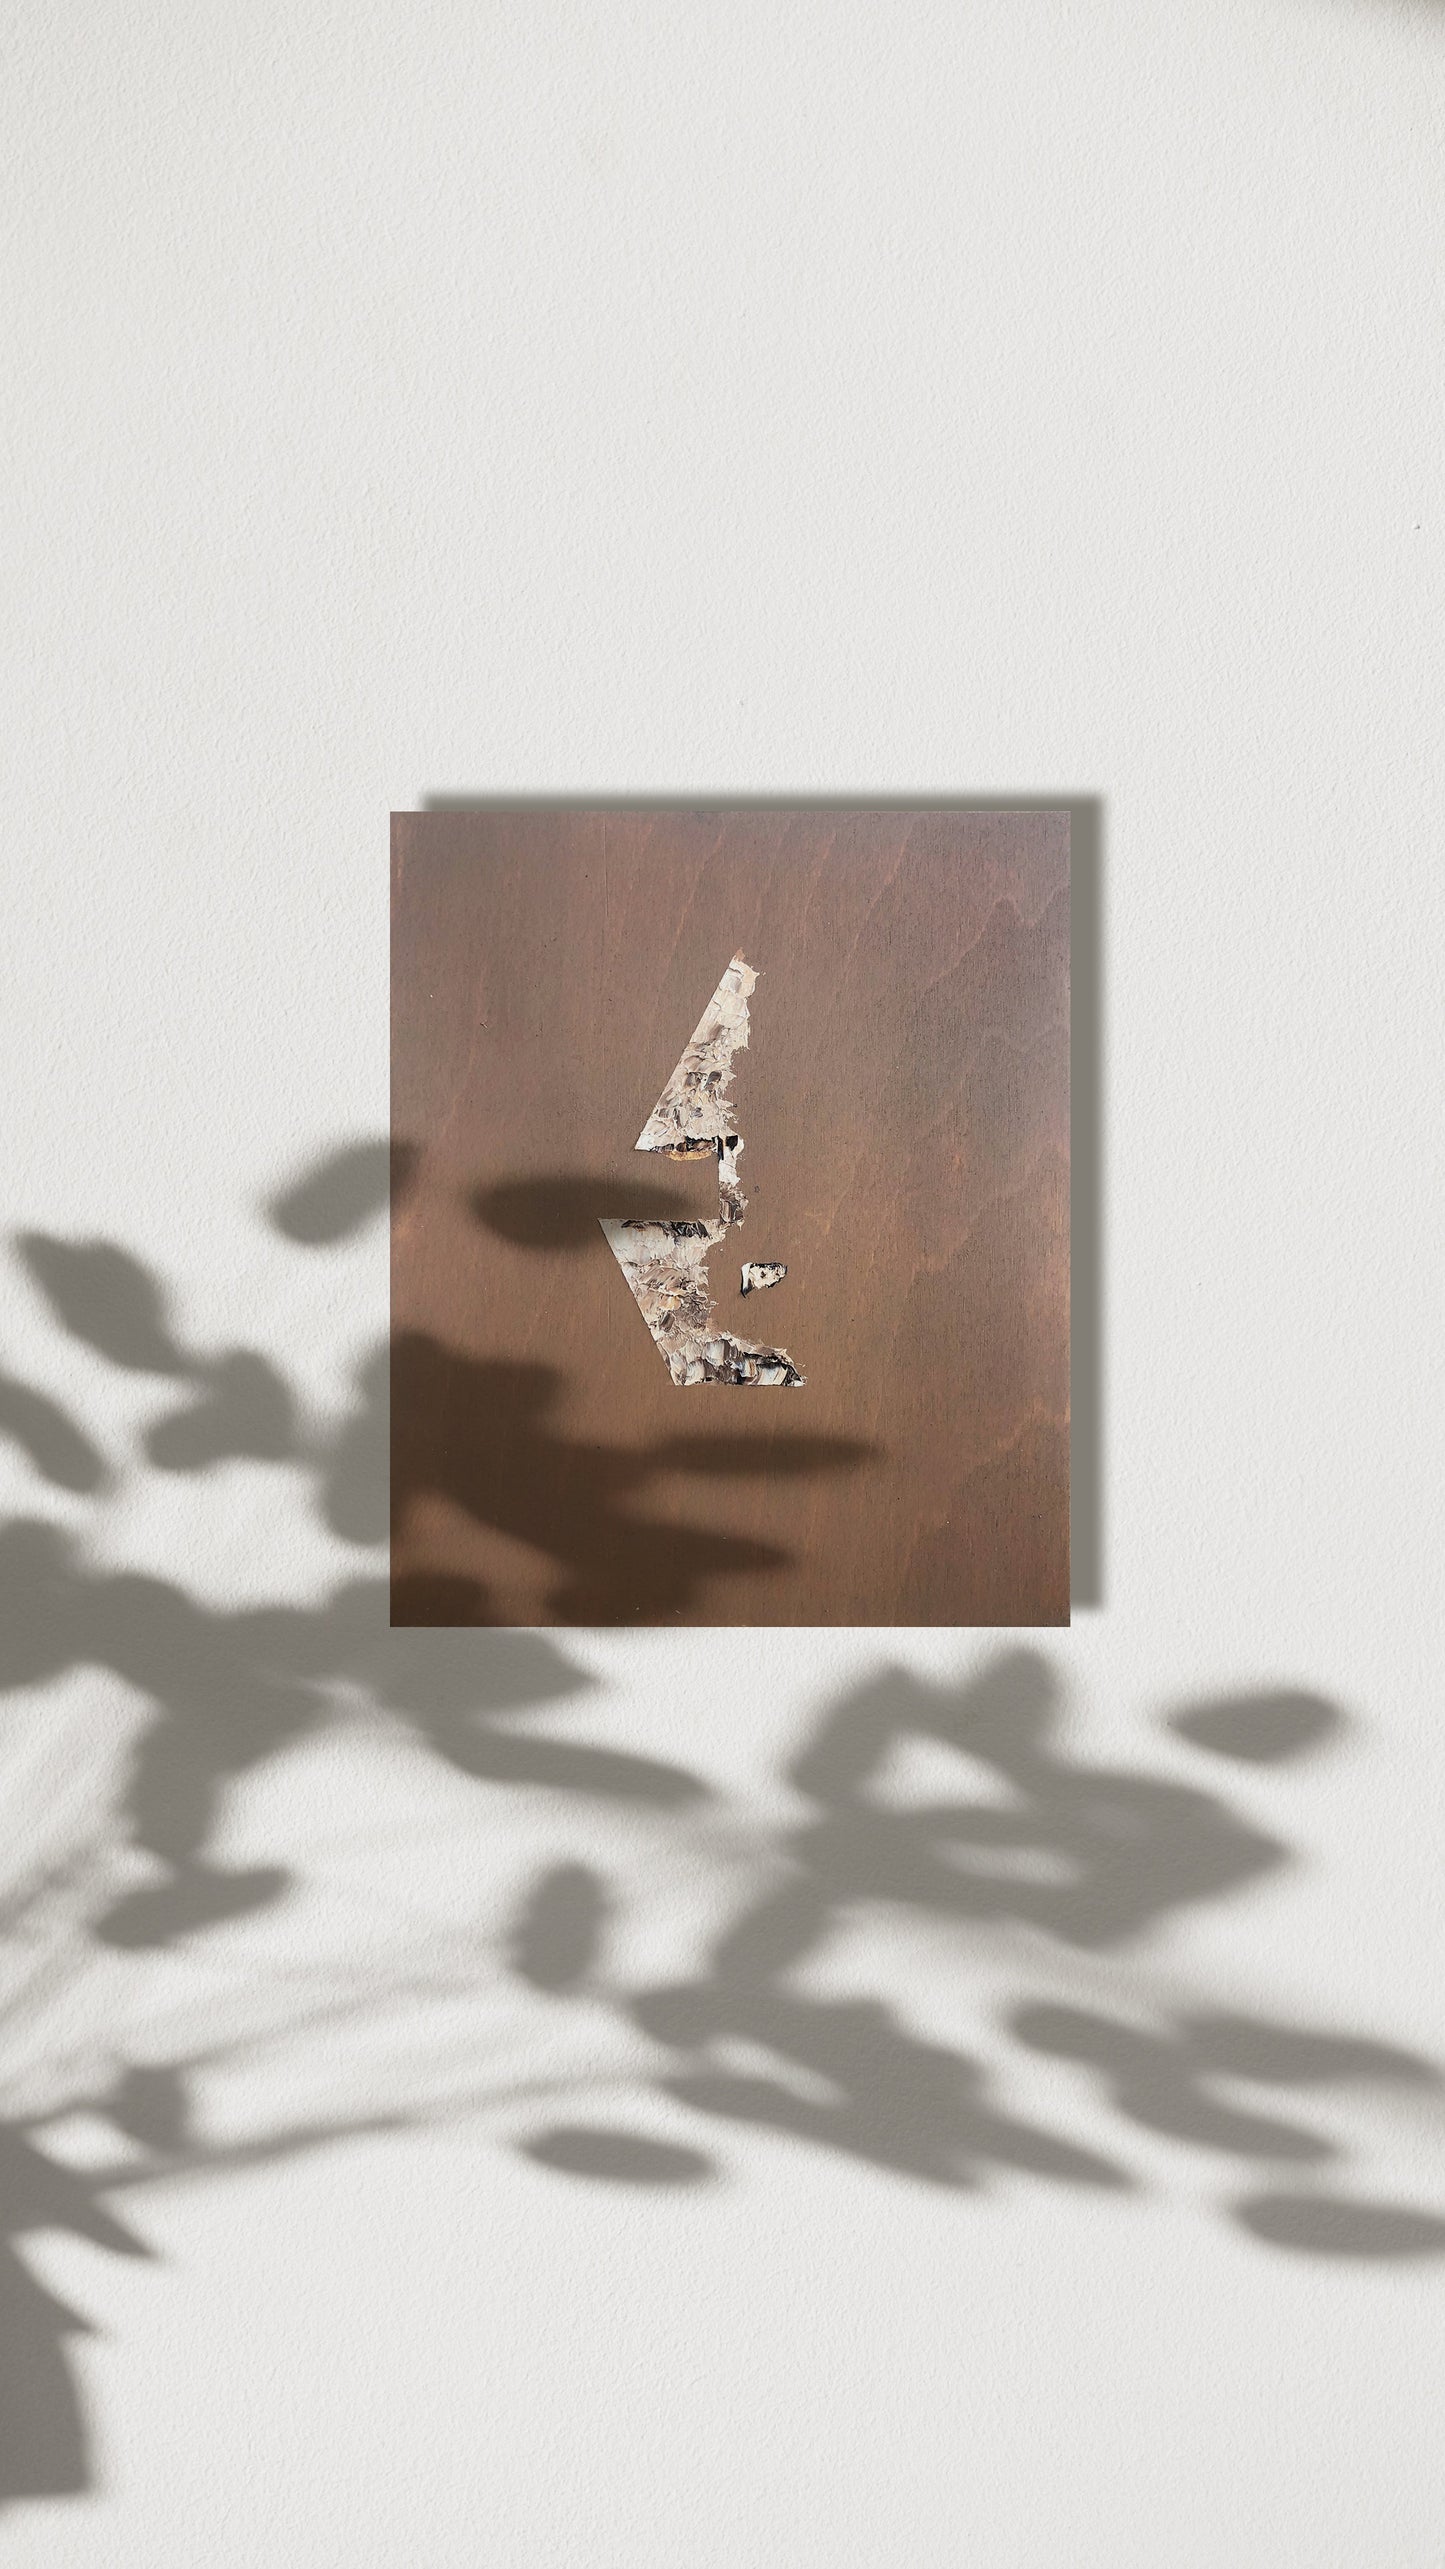 Abstract figure artwork in a neutral palette pictured on the wall